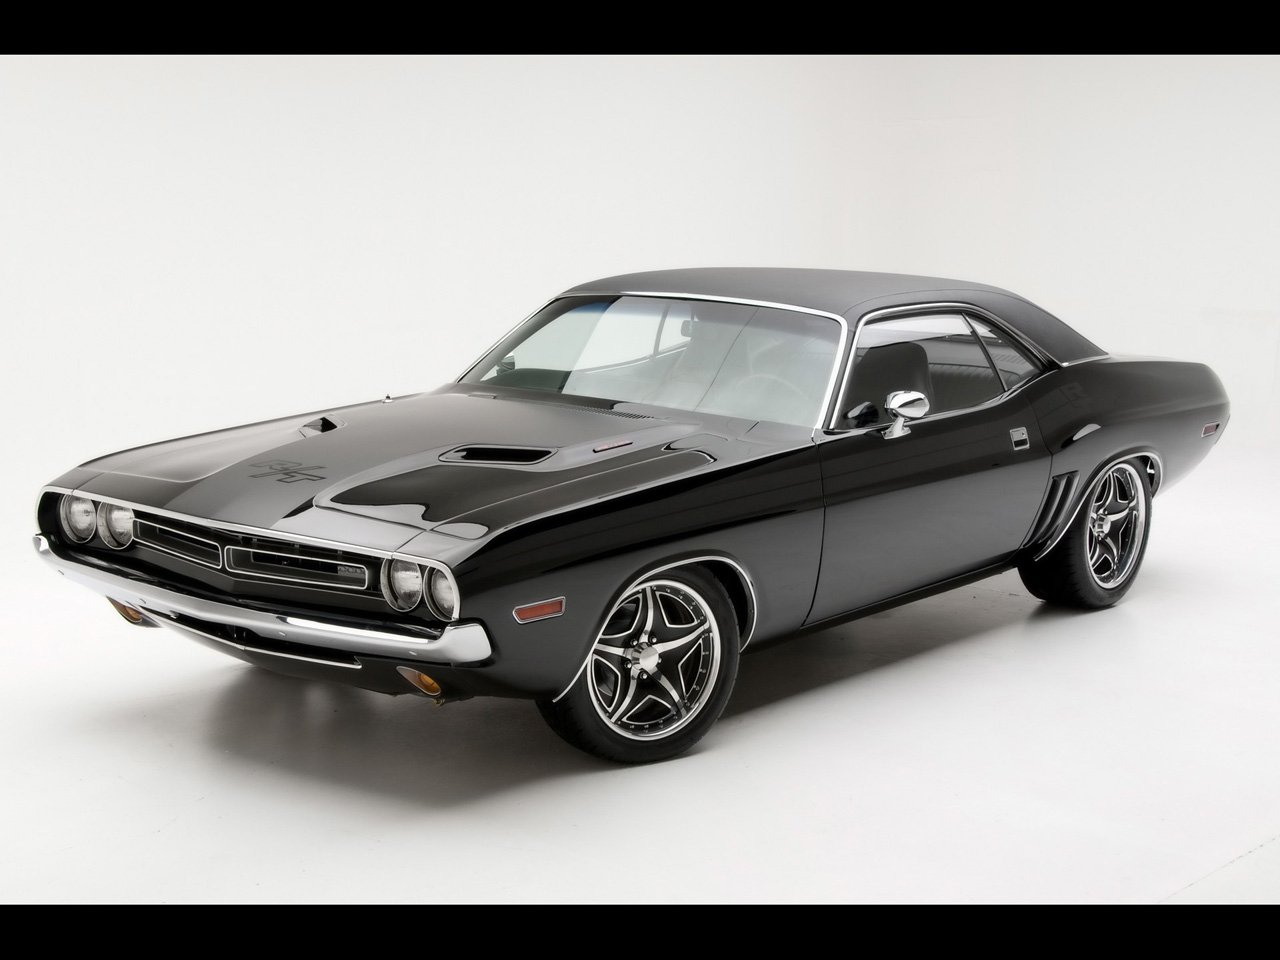 Hd Car wallpapers cool muscle cars wallpaper 1280x960